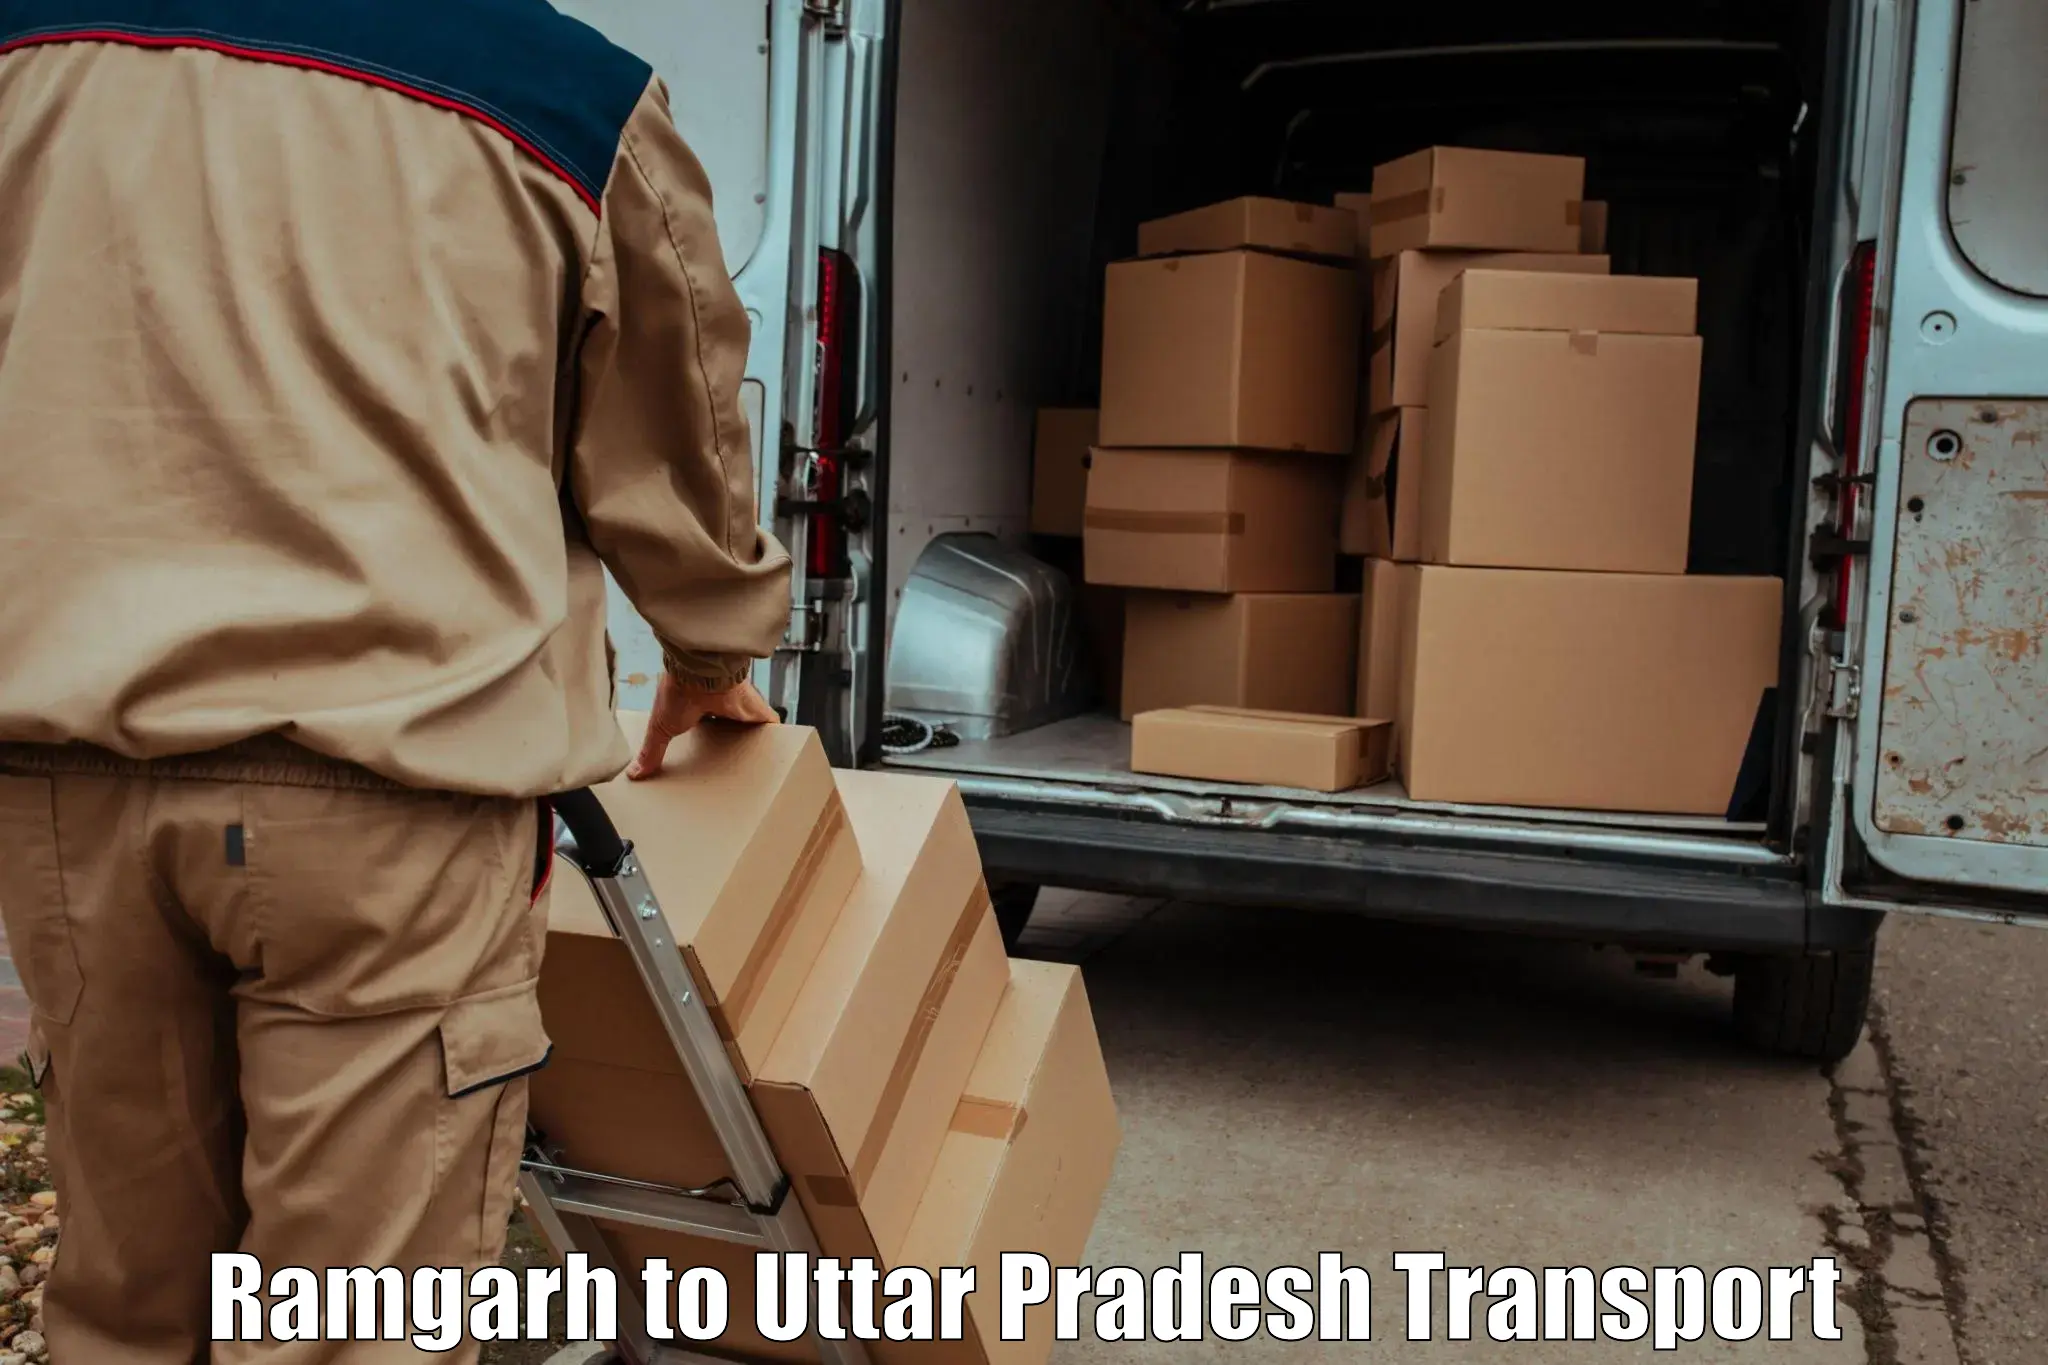 Interstate transport services in Ramgarh to Fatehabad Agra